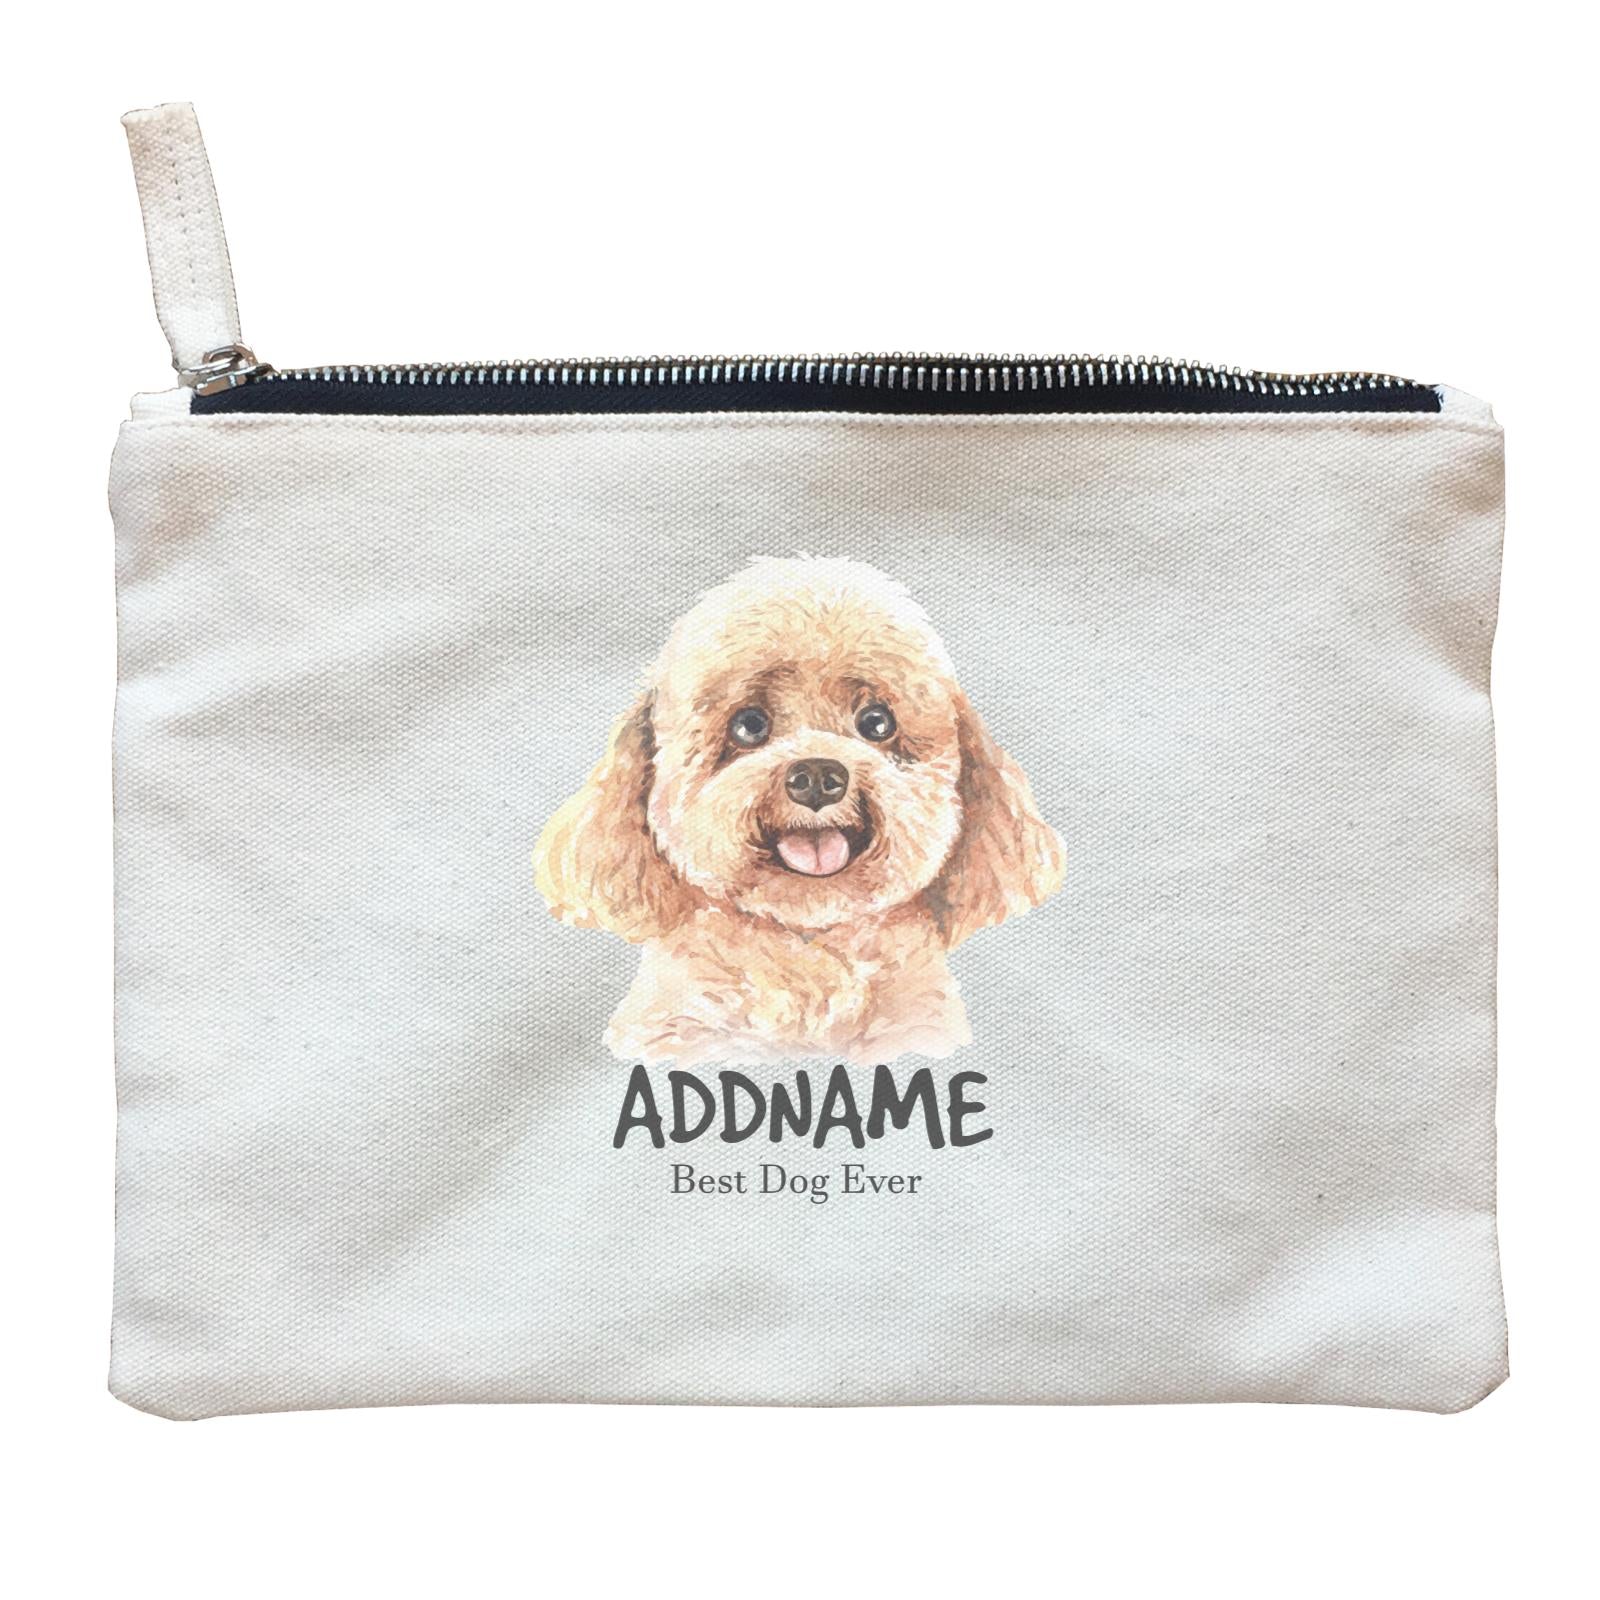 Watercolor Dog Poodle Dog Best Dog Ever Addname Zipper Pouch